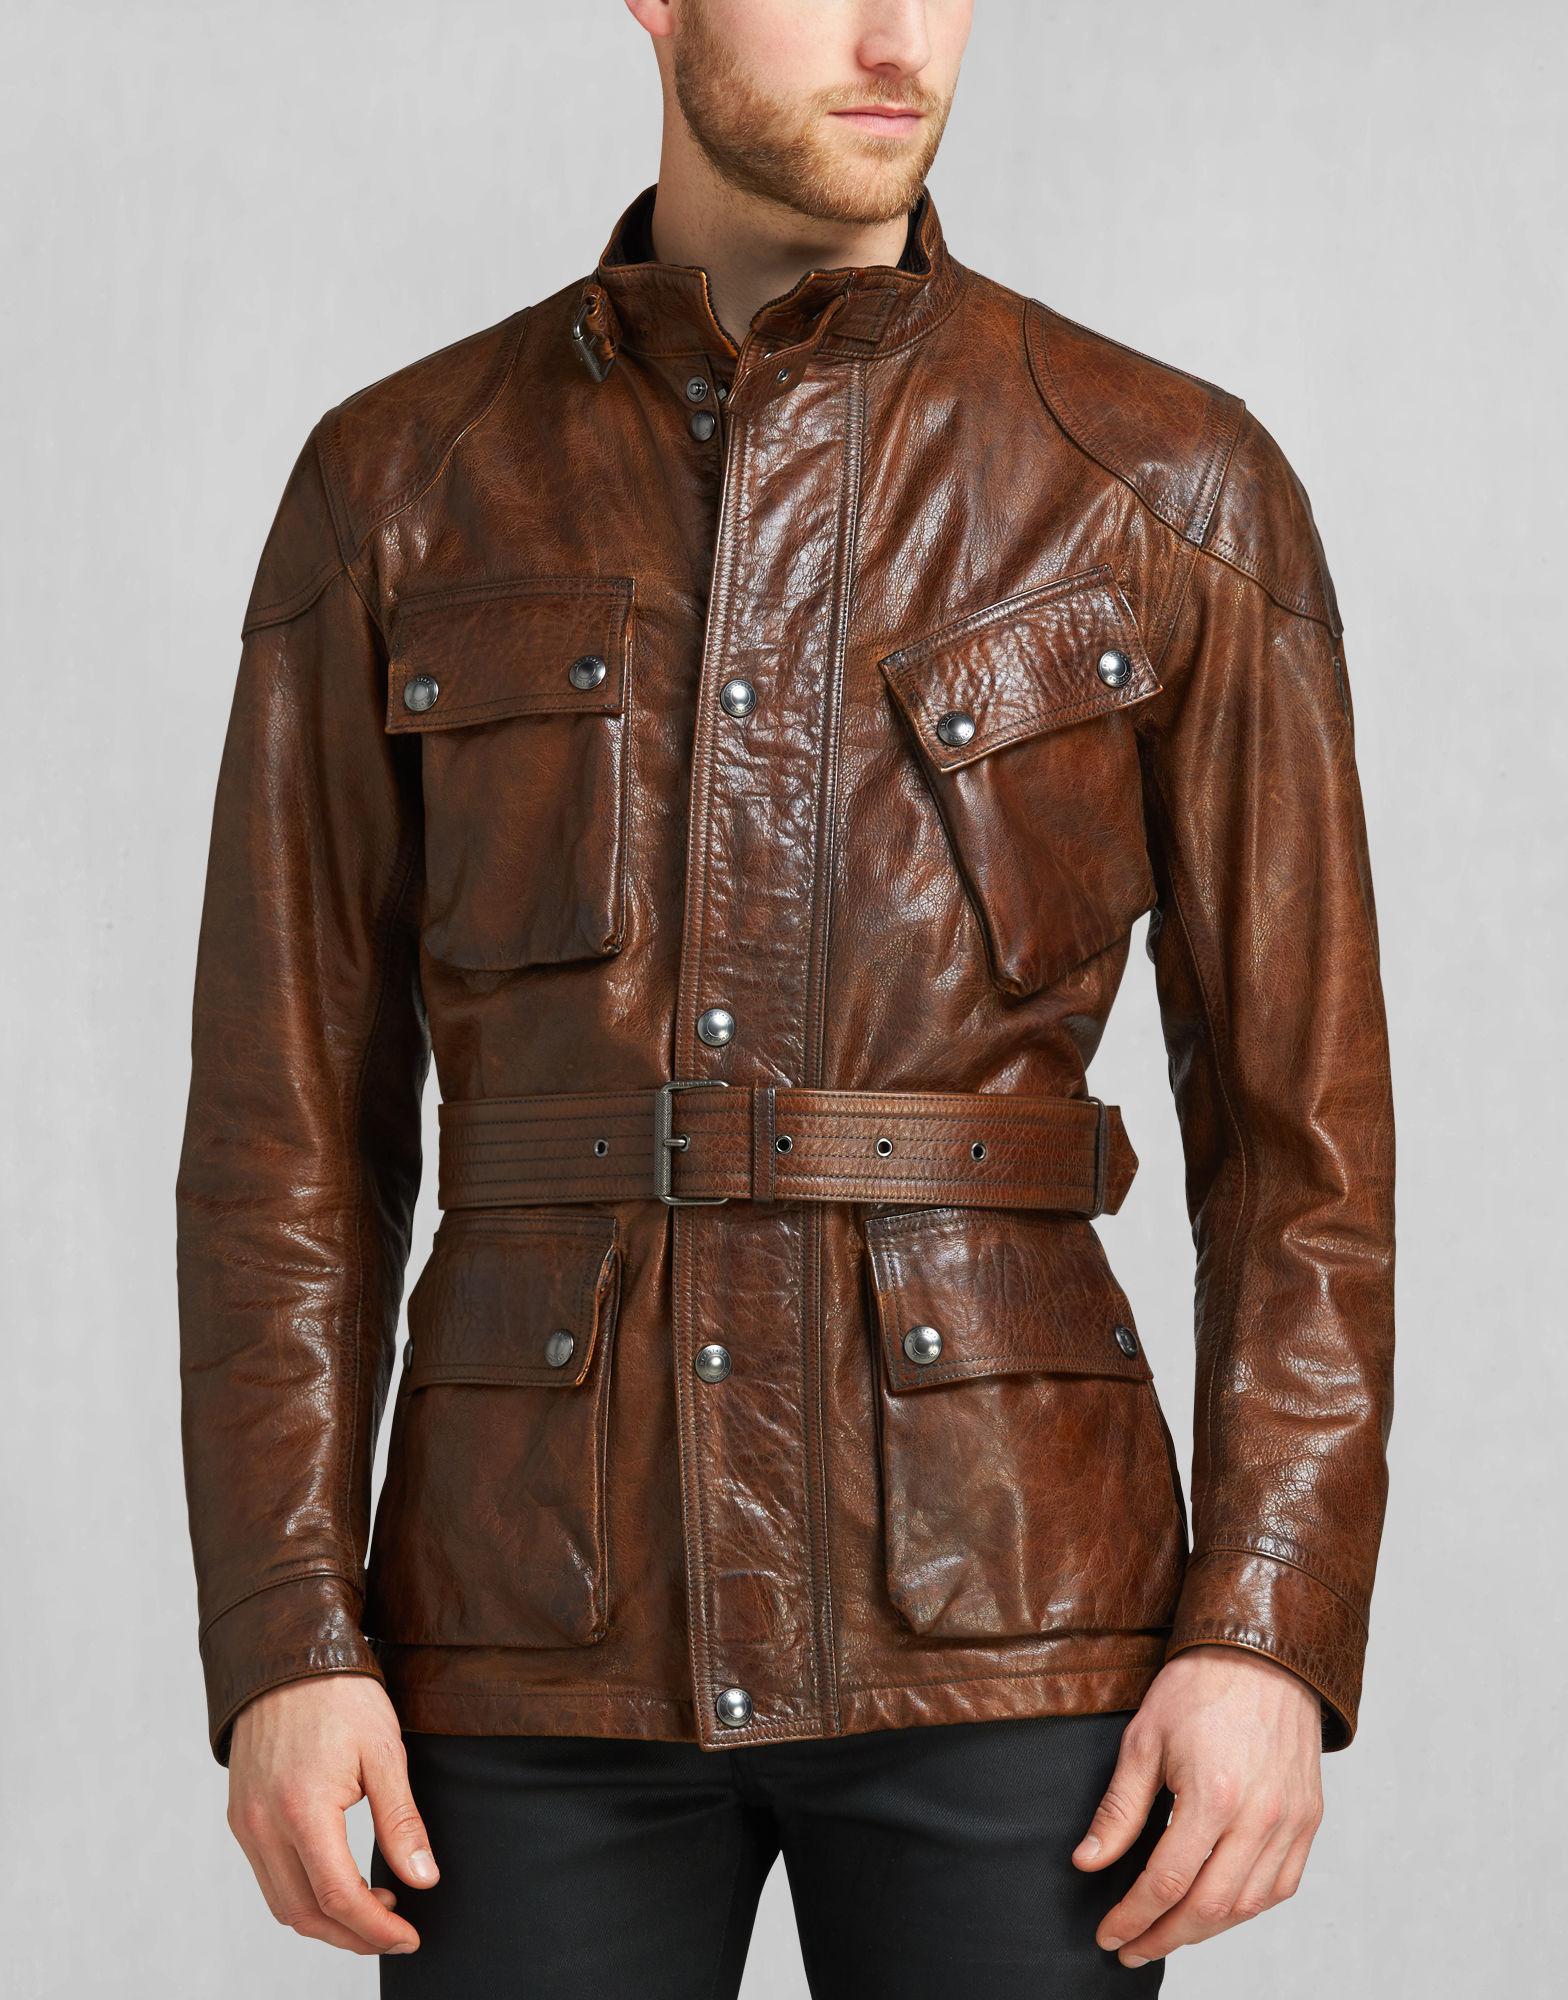 Lyst - Belstaff The Panther Brown Waxed Leather Jacket in Brown for Men